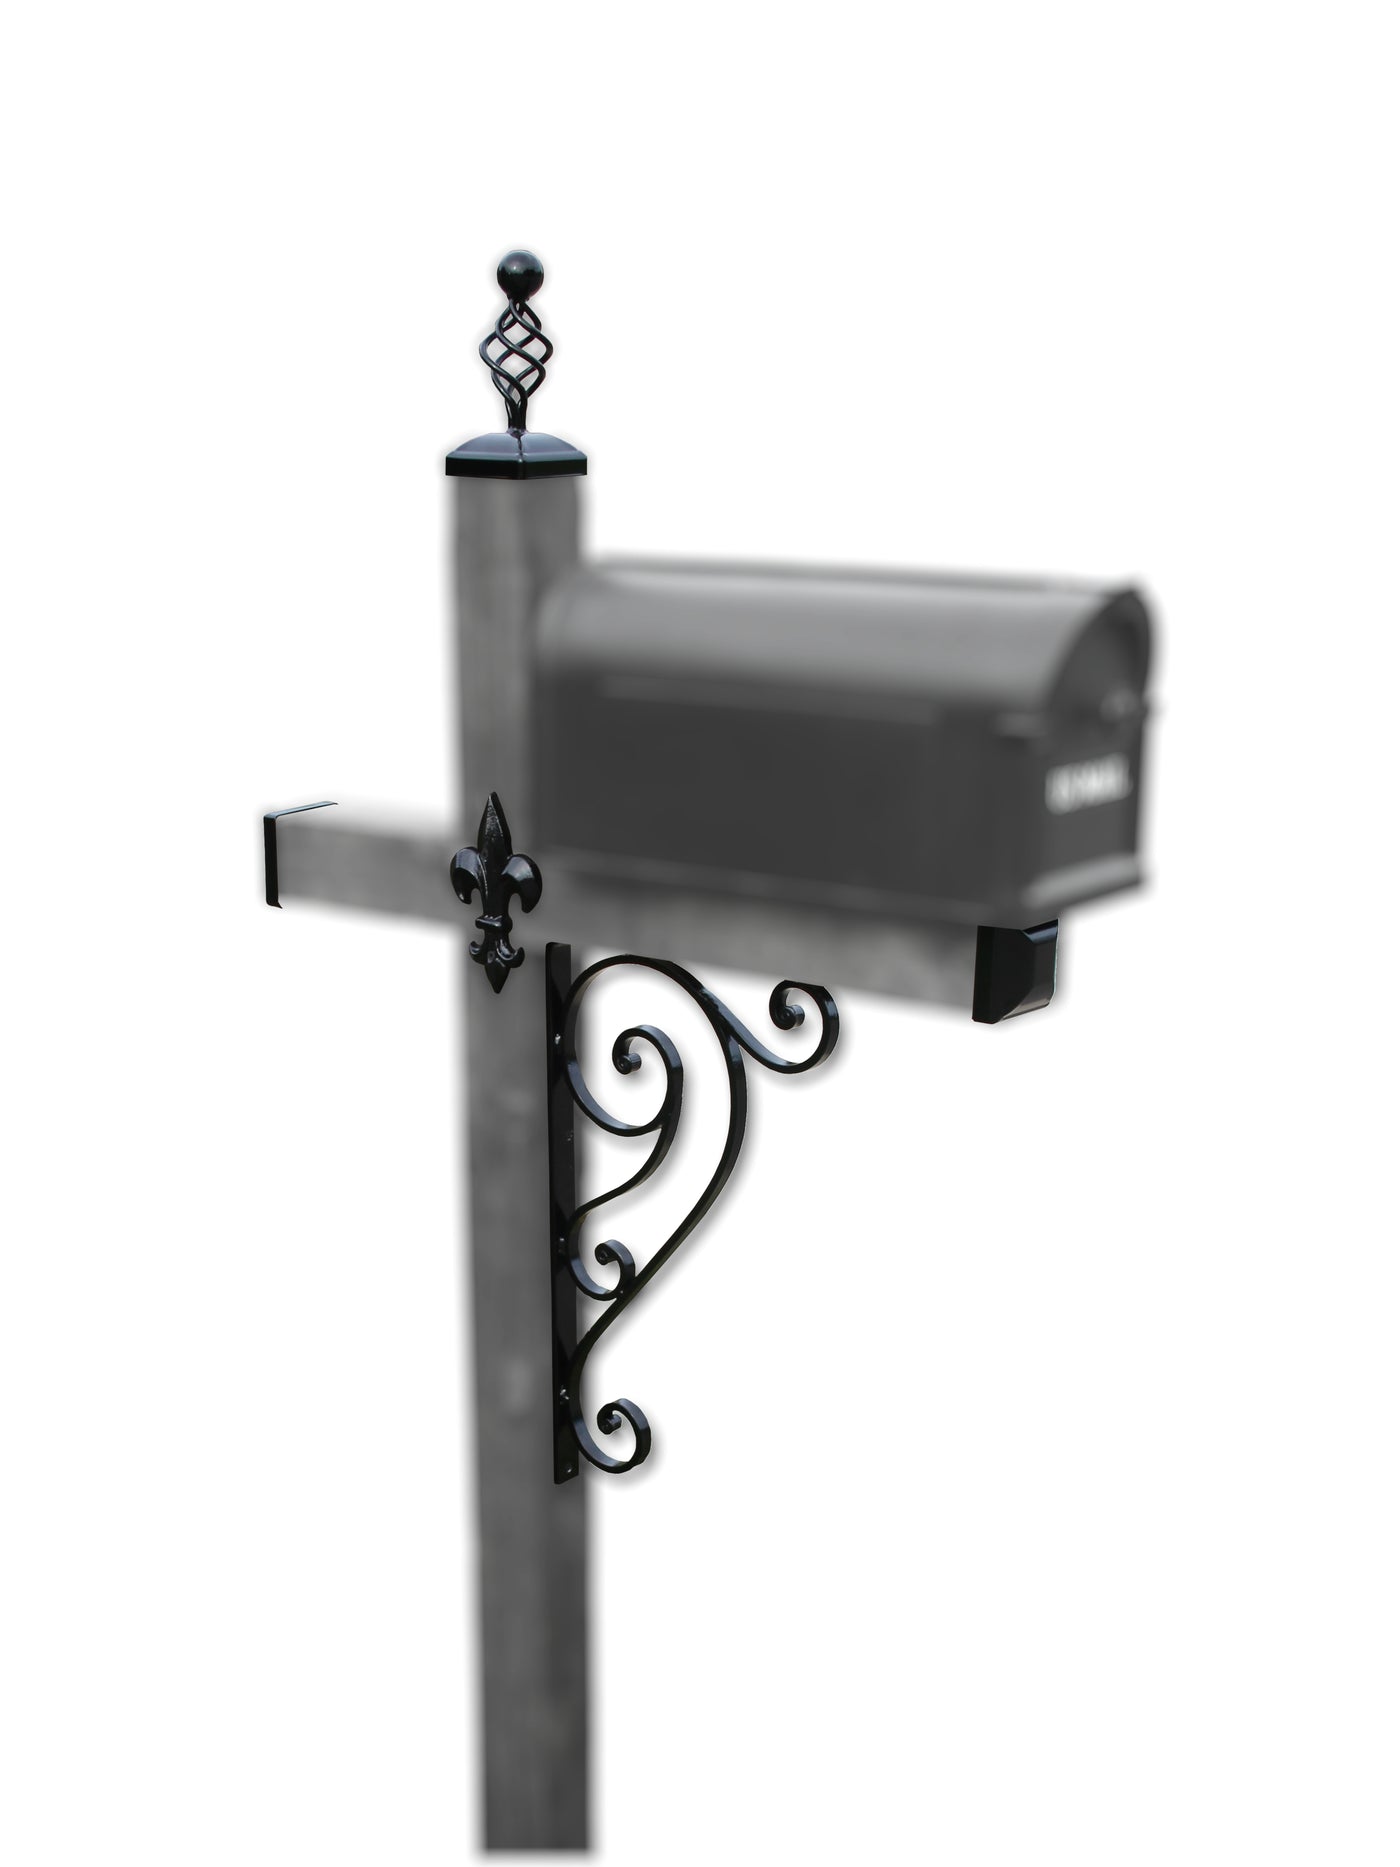 Scrolled Wrought Iron Mailbox Post Dress Up Kit - Madison Iron and Wood - Mailbox Post Decor - metal outdoor decor - Steel deocrations - american made products - veteran owned business products - fencing decorations - fencing supplies - custom wall decorations - personalized wall signs - steel - decorative post caps - steel post caps - metal post caps - brackets - structural brackets - home improvement - easter - easter decorations - easter gift - easter yard decor